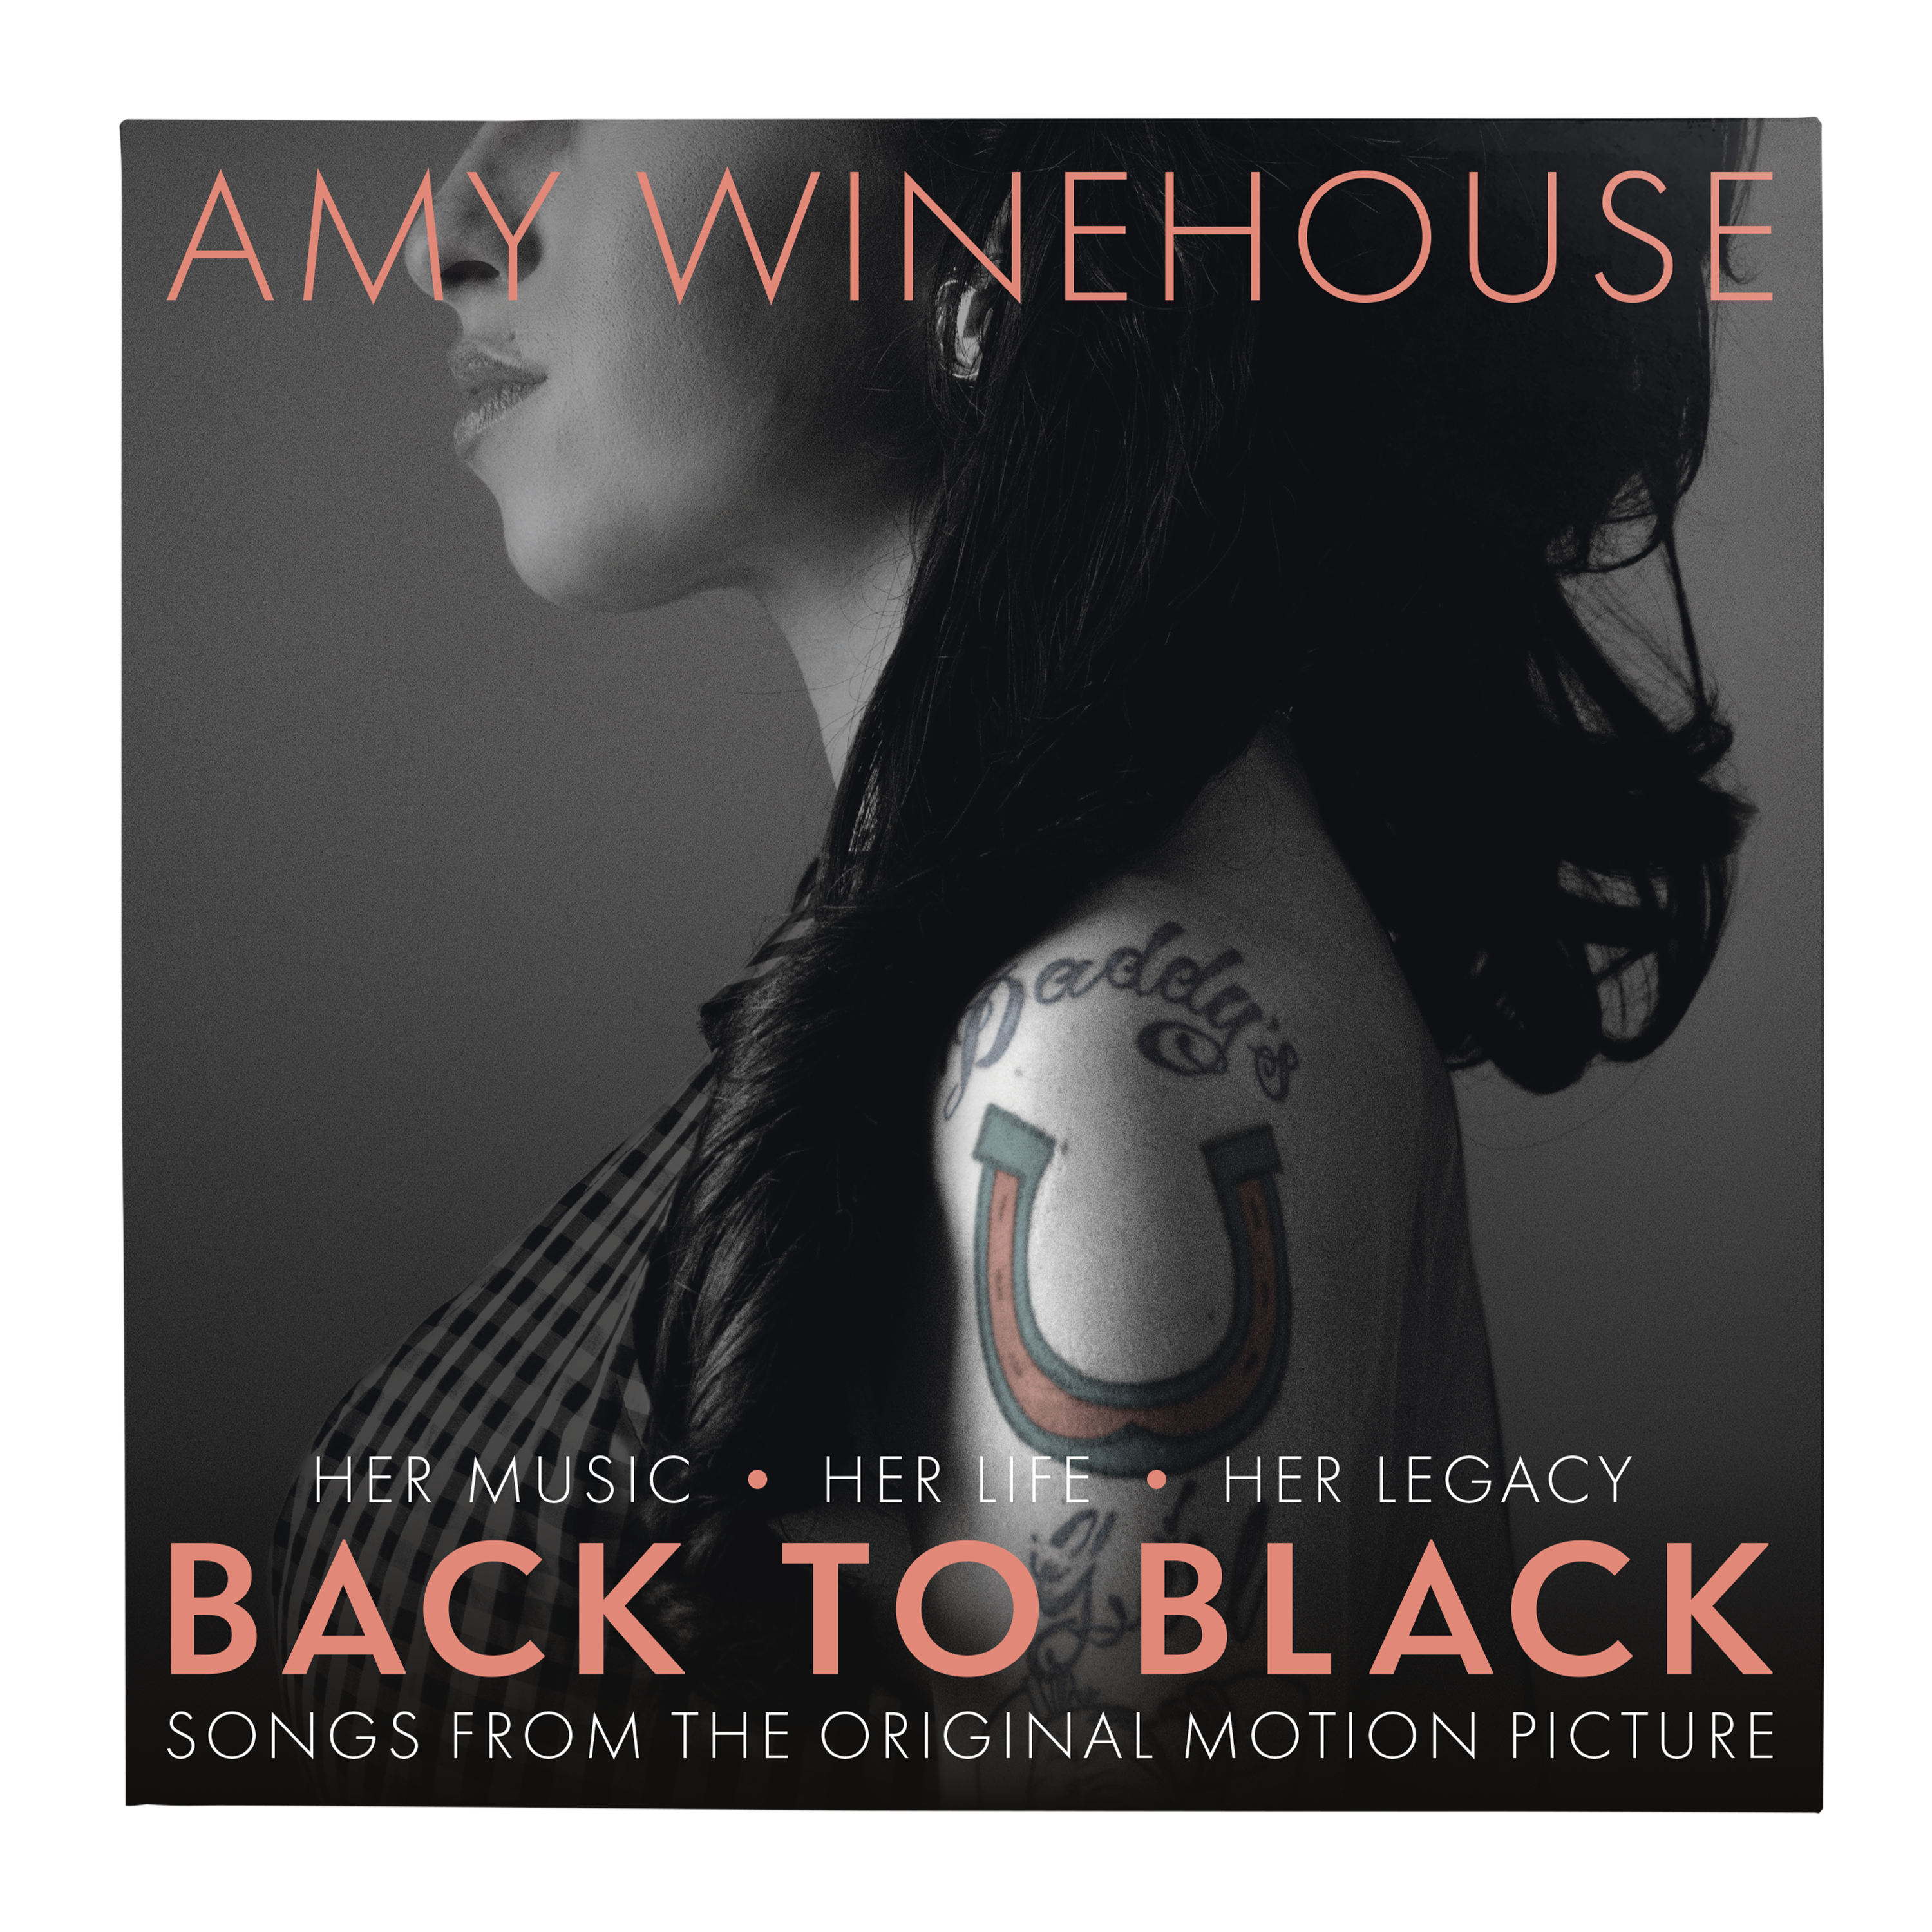 Original Soundtrack - Back To Black - Songs from the Original Motion Picture: Vinyl LP